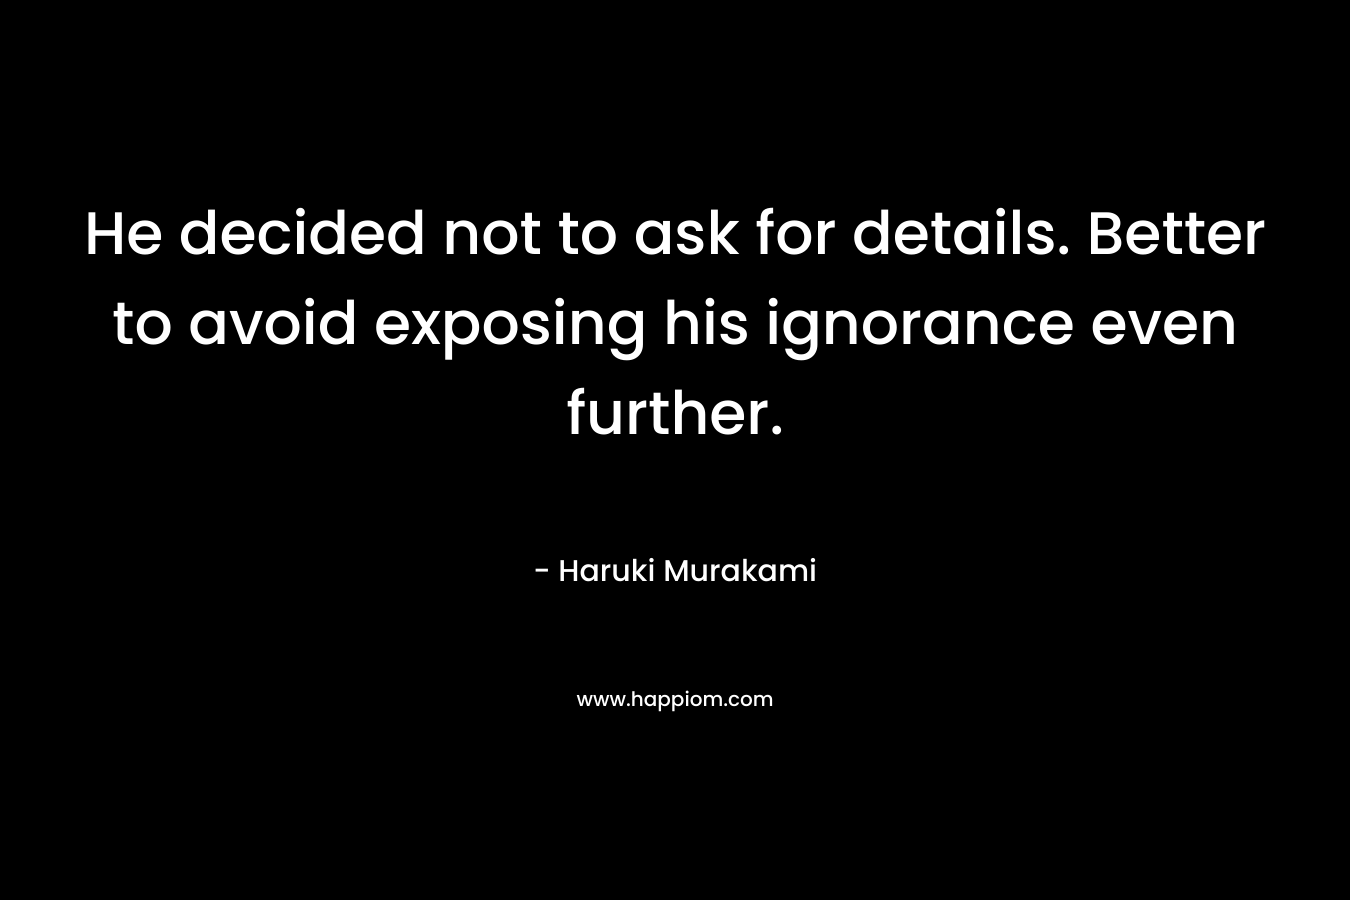 He decided not to ask for details. Better to avoid exposing his ignorance even further. – Haruki Murakami